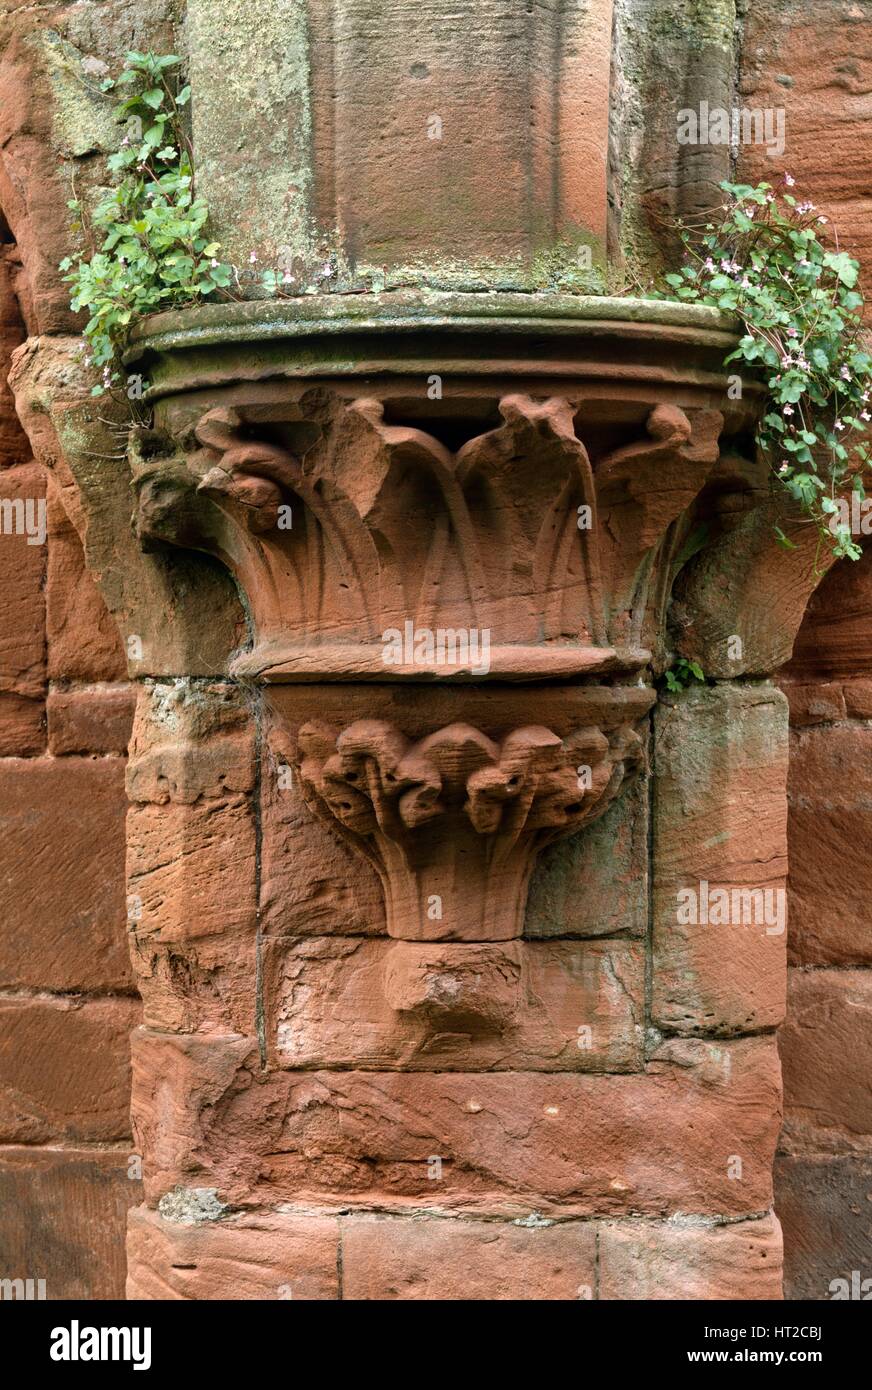 Decorated stone corbel situated in the dormitory undercroft, Furness Abbey, Cumbria, c2000s(?). Artist: Historic England Staff Photographer. Stock Photo